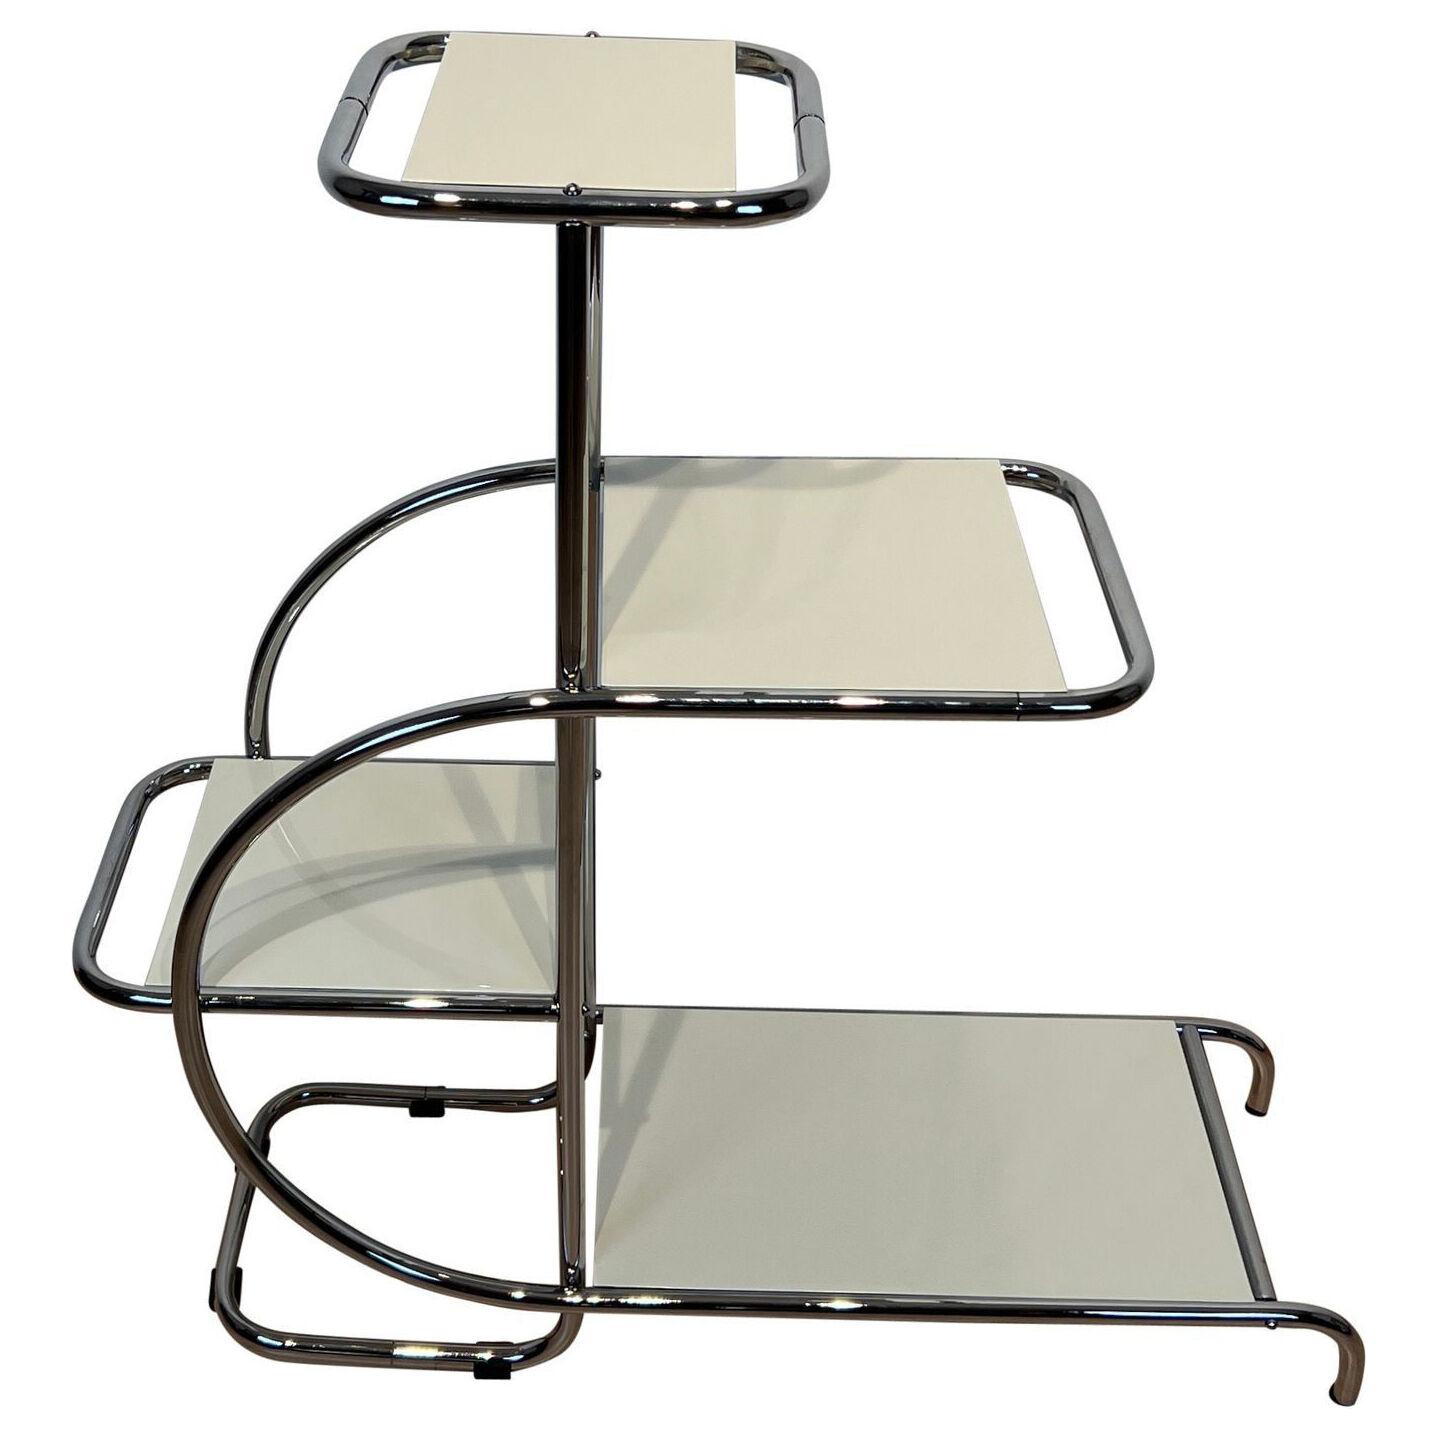 Bauhaus Steeltube Etagere, Creme-White Lacquer, Nickel Plate, Germany, 1930s